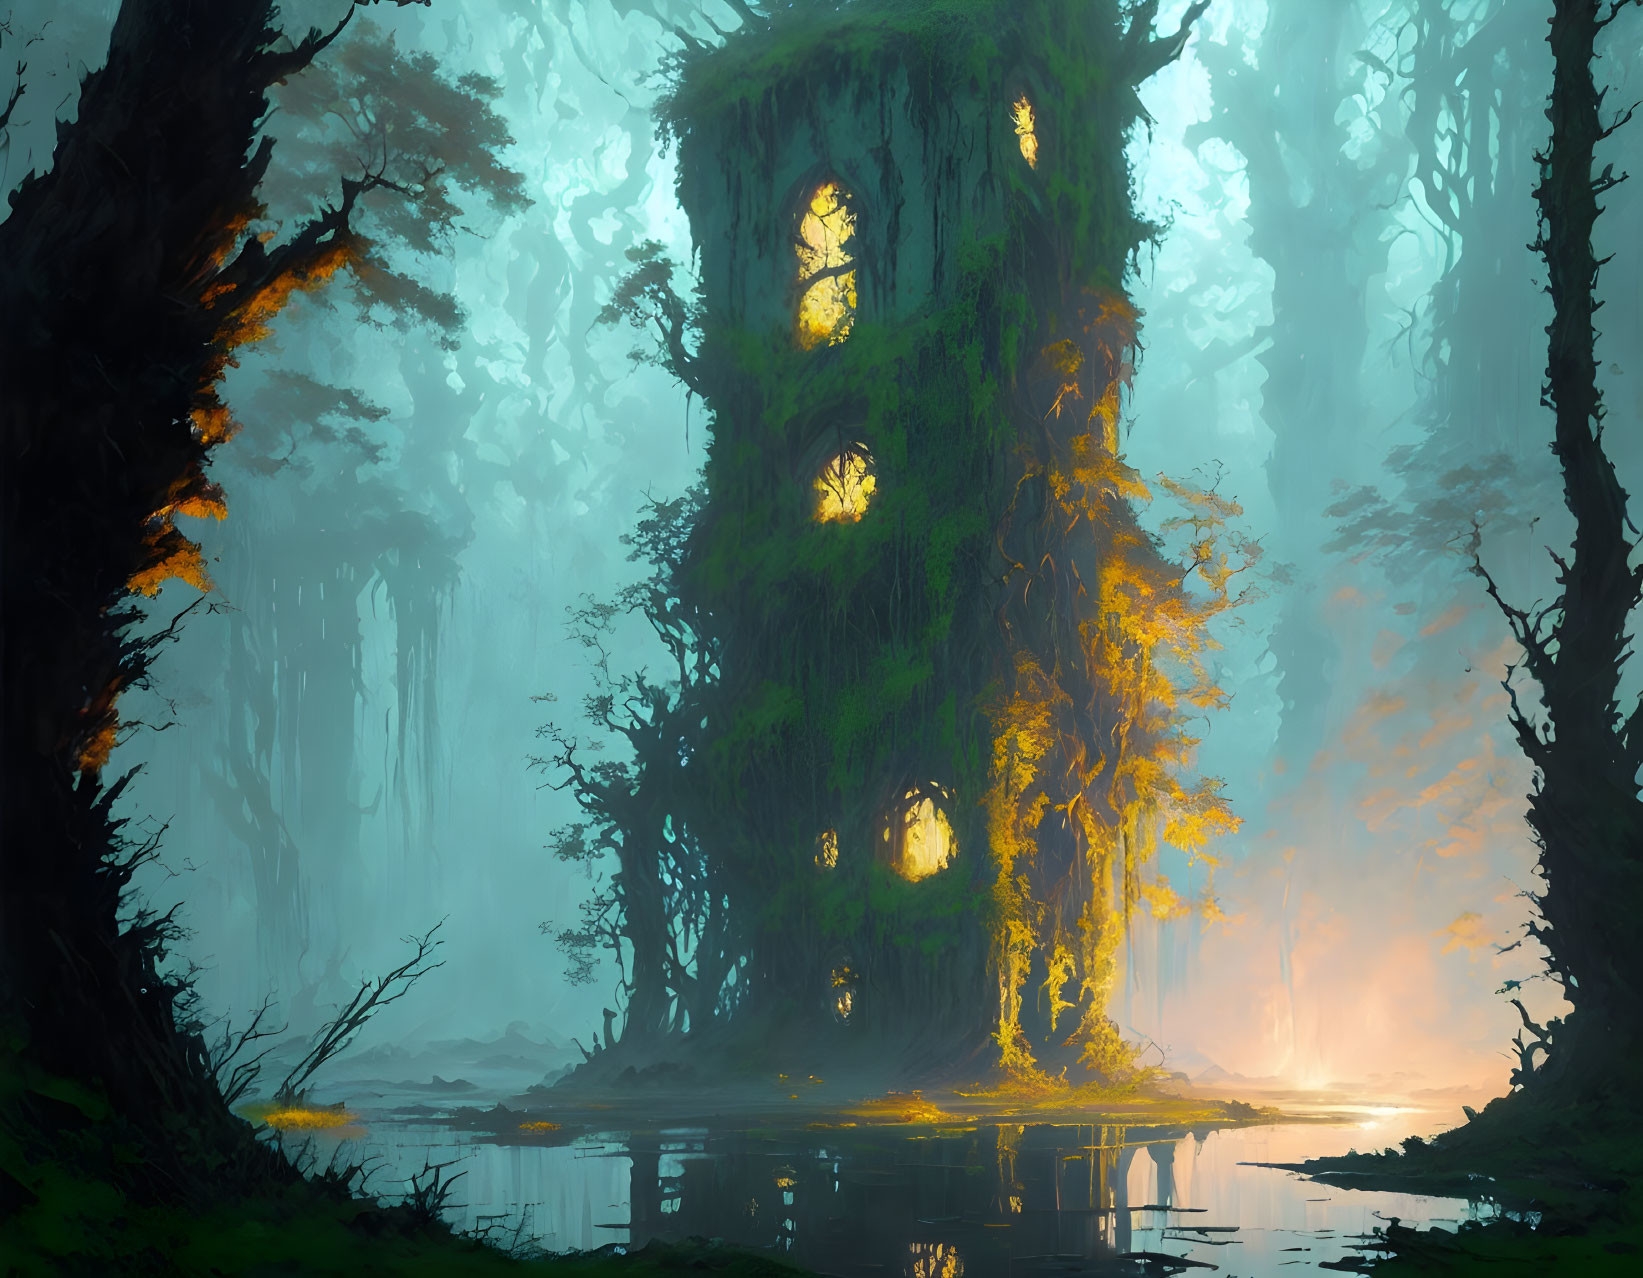 Ethereal forest scene with ancient tree and glowing windows